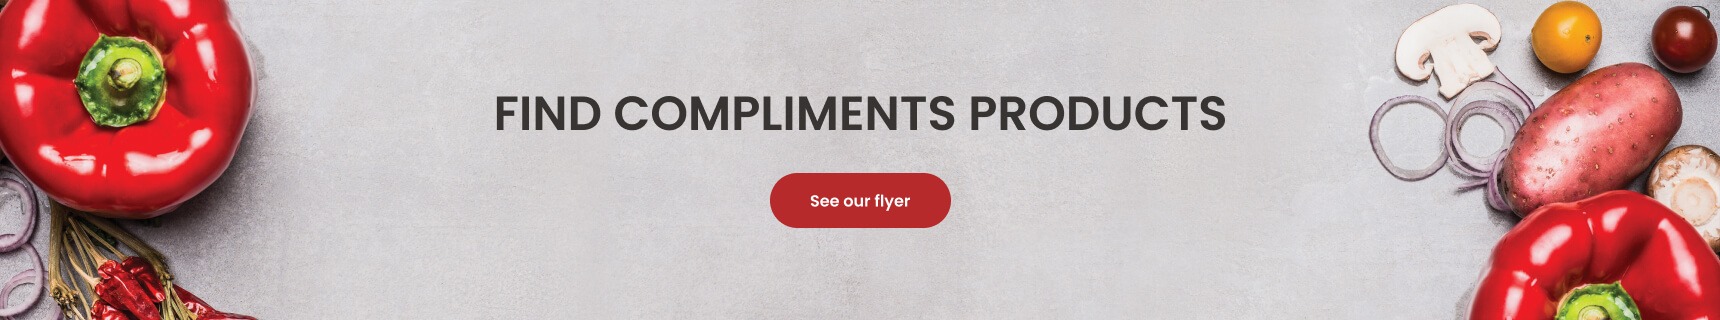 Find Compliments products